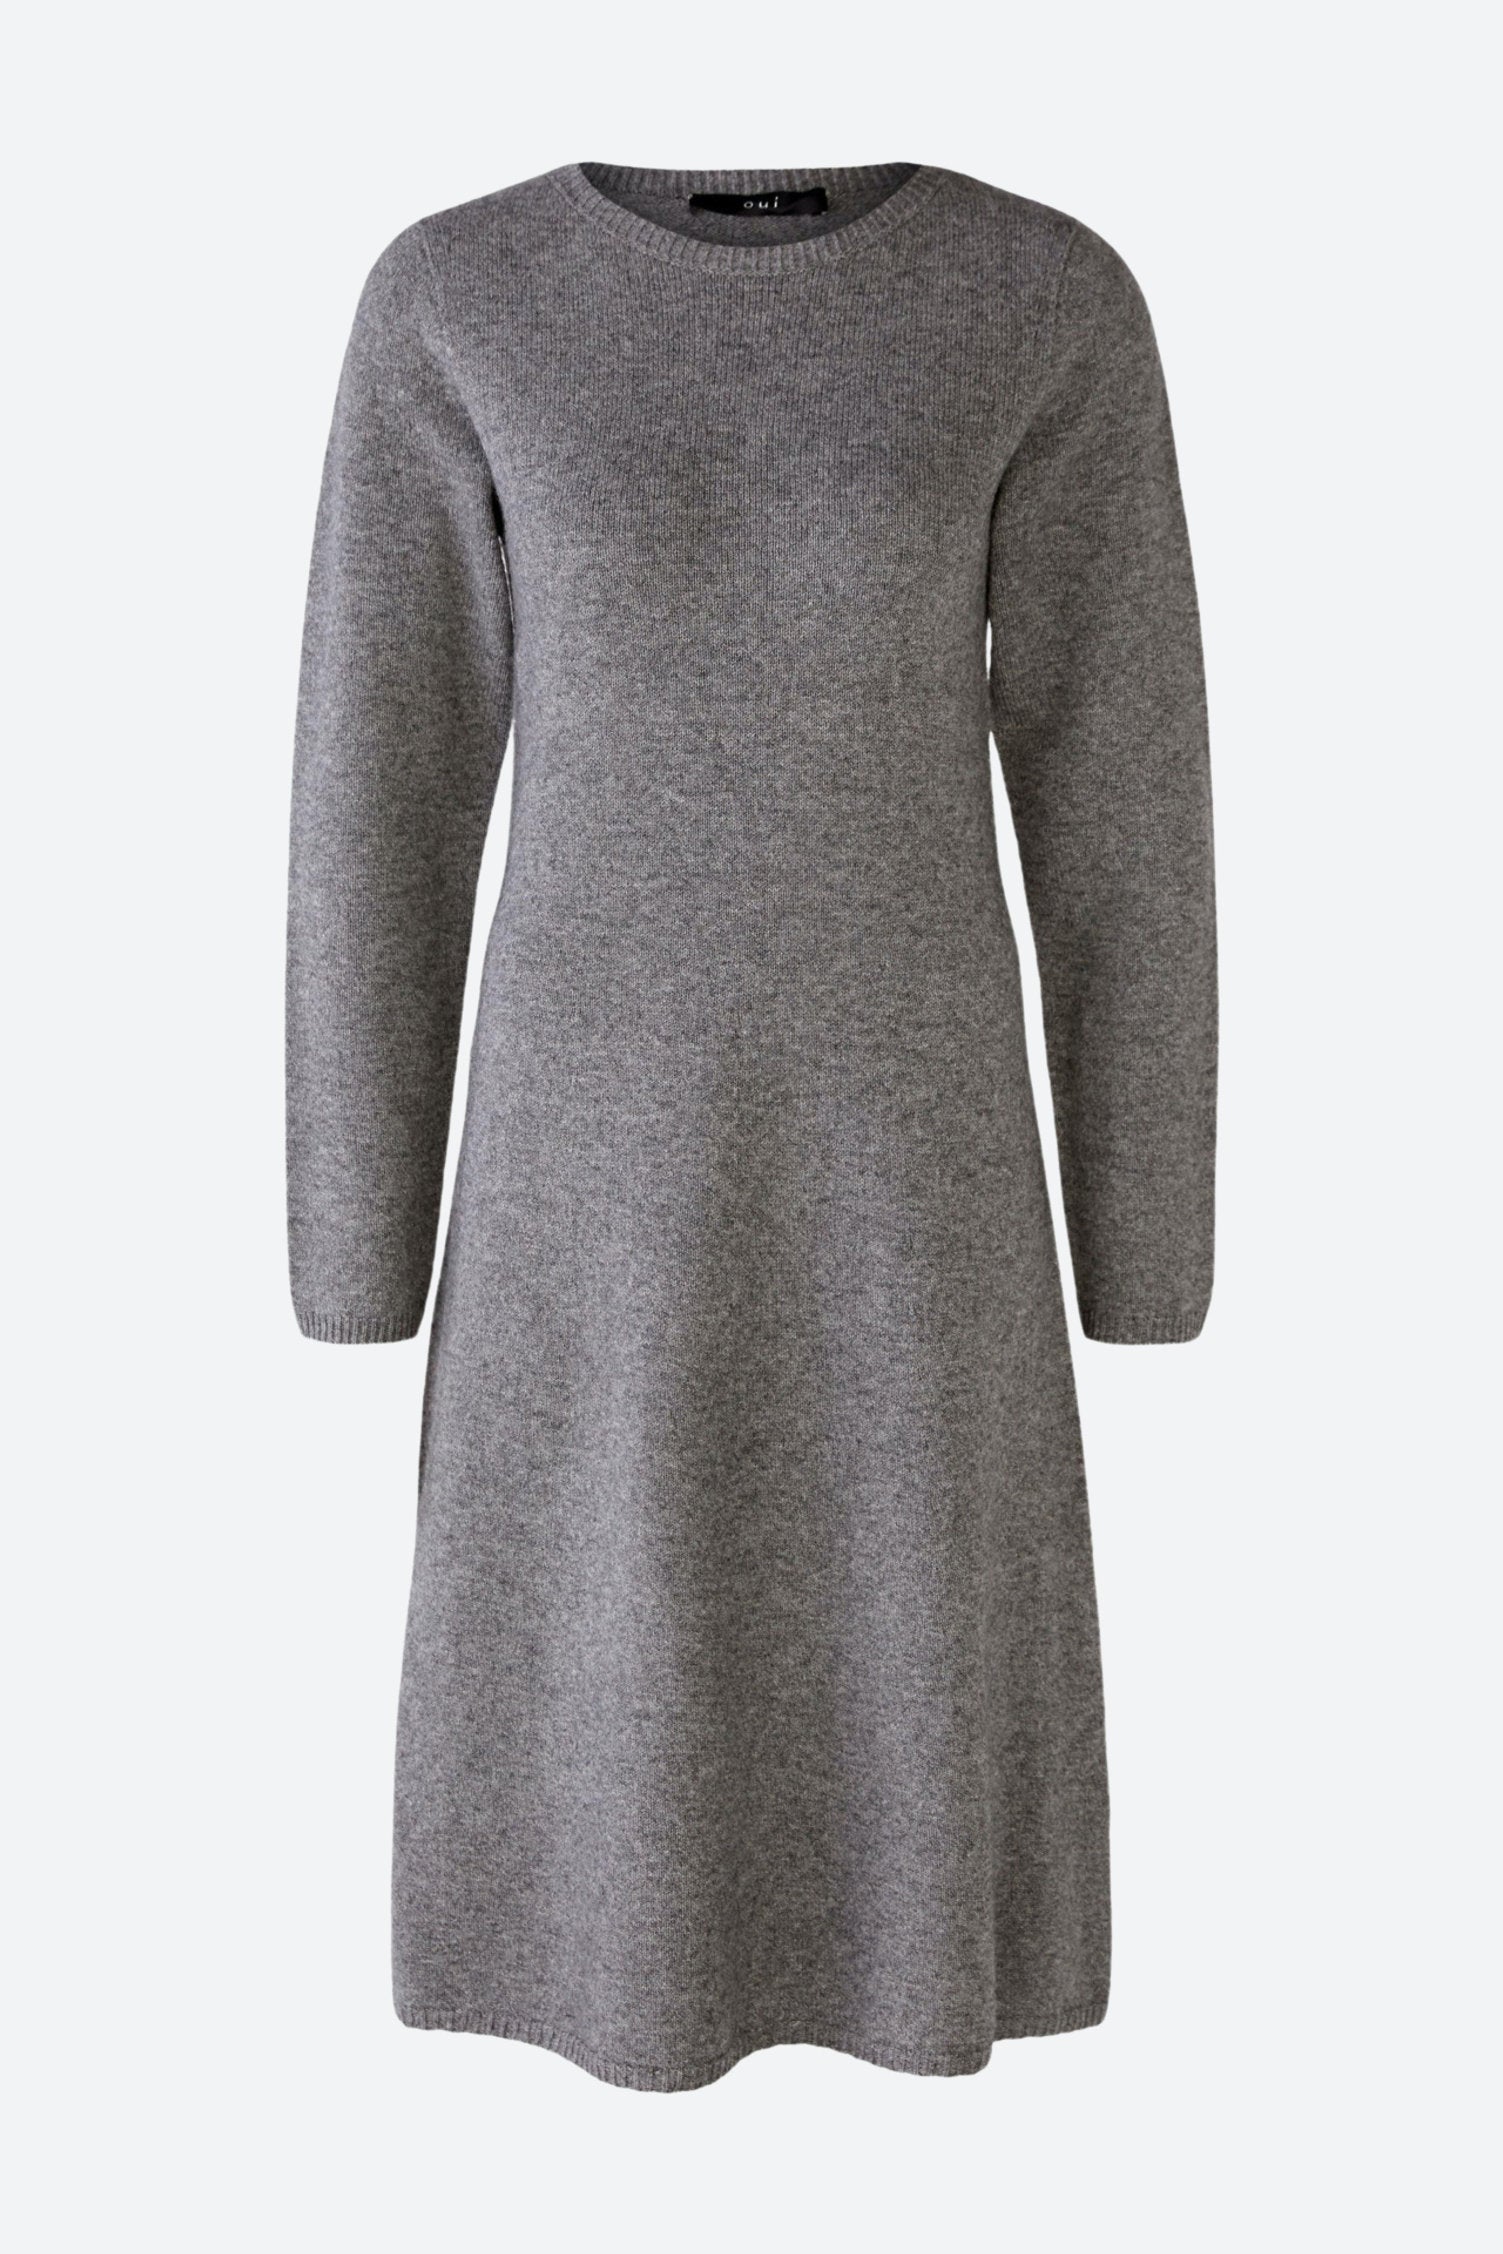 Knitted Dress Wool Blend With Modal_79699_9559_06